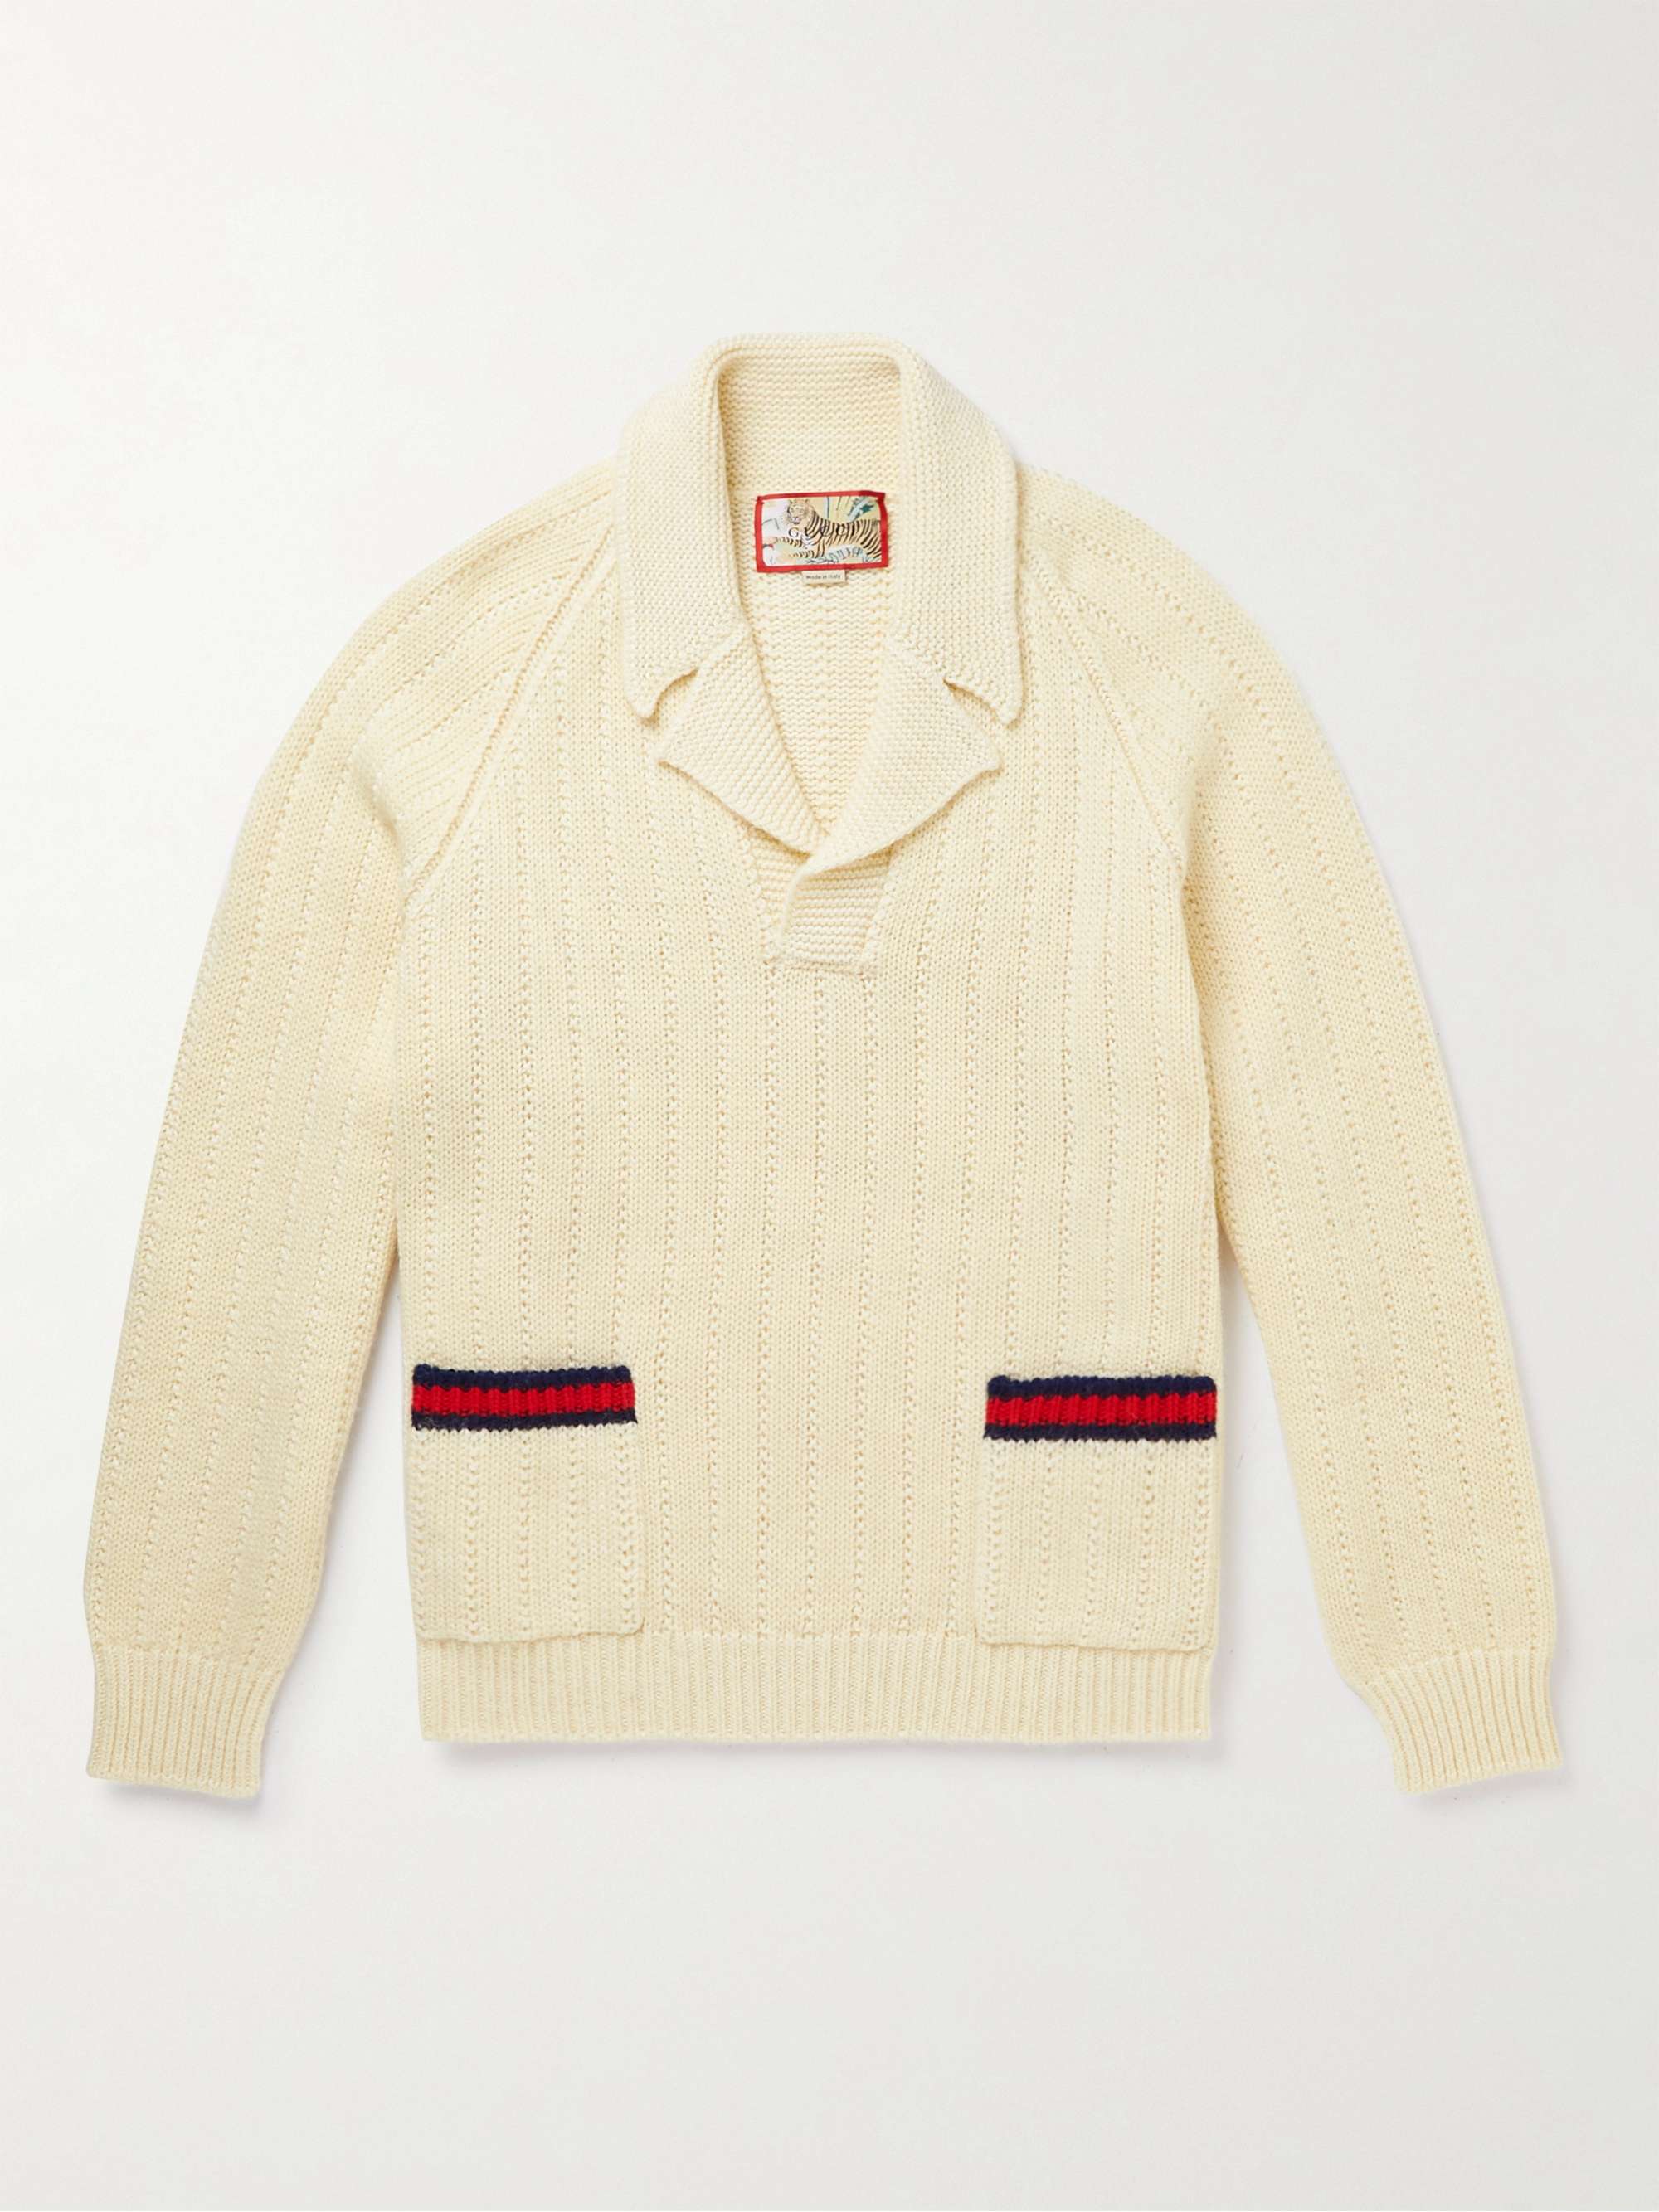 GUCCI Embroidered Ribbed Wool and Cotton-Blend Sweater